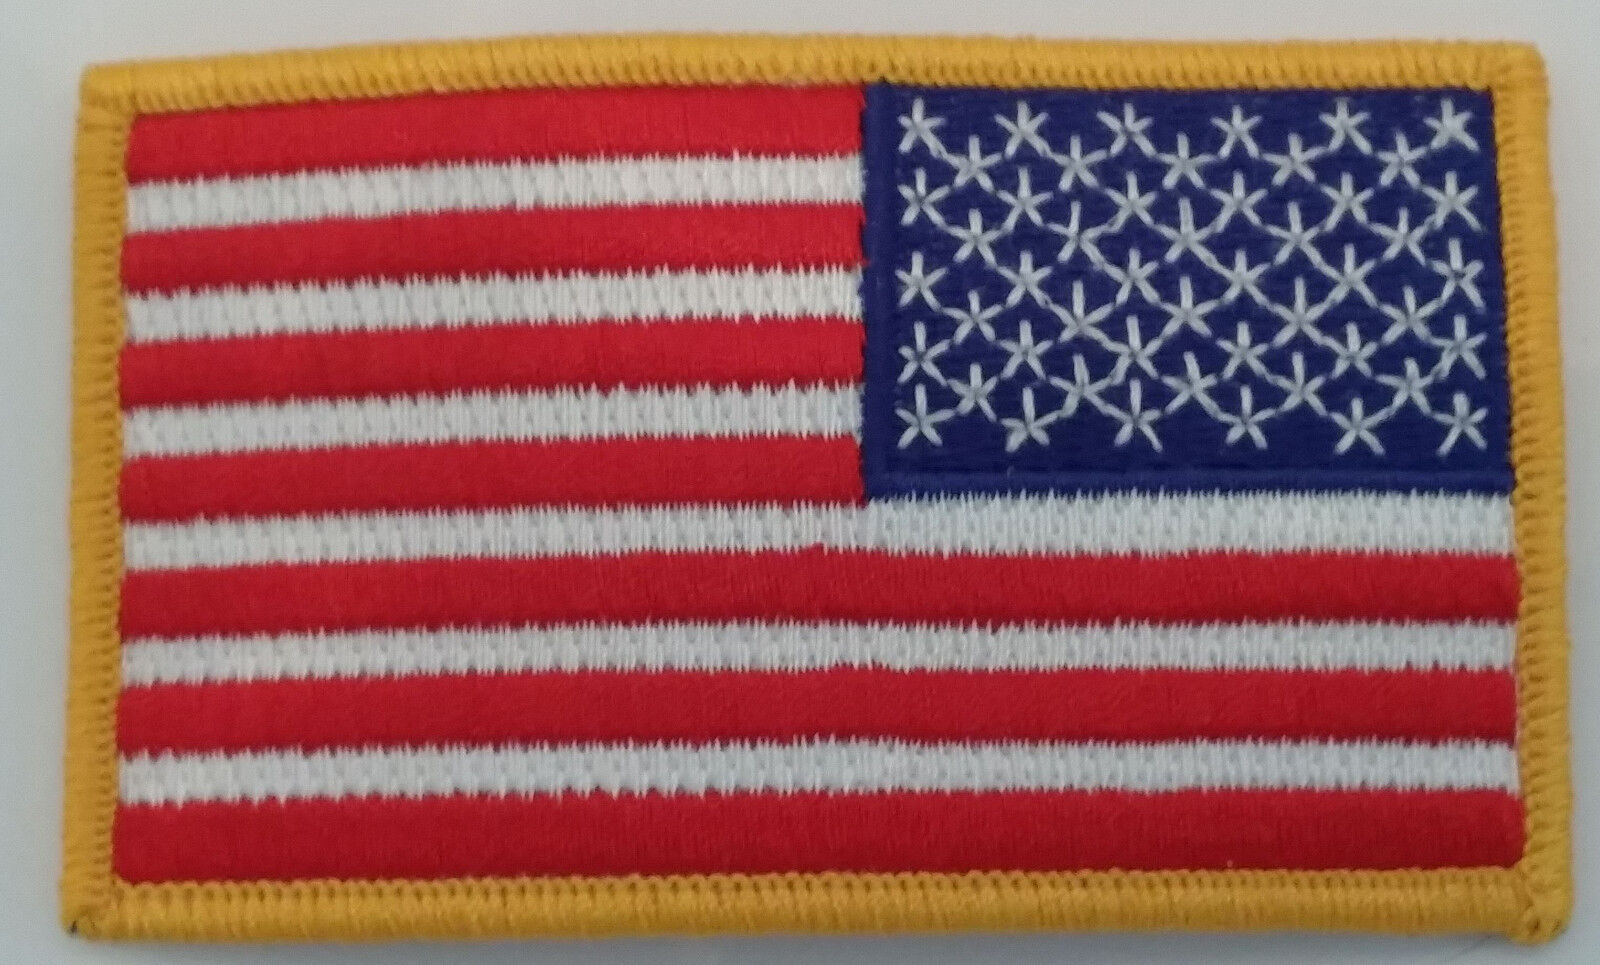 US ARMY US FLAG REVERSE PATCH - MADE IN THE USA